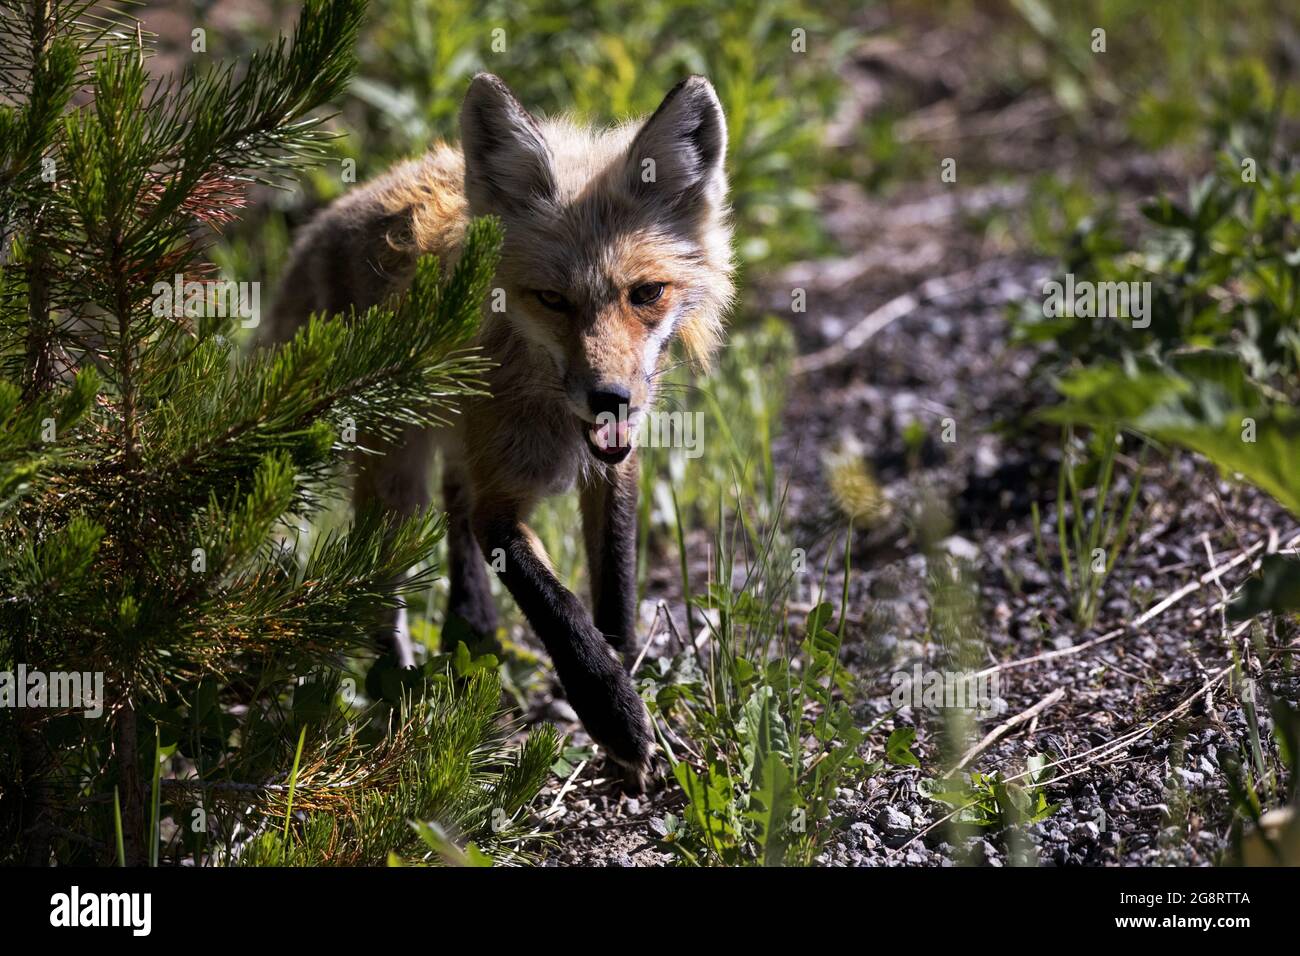 Red fox, auburn hues glowing in sun, walks in Shoshone National Forest, part of Yellowstone Timberland Reserve, in Wyoming. Stock Photo